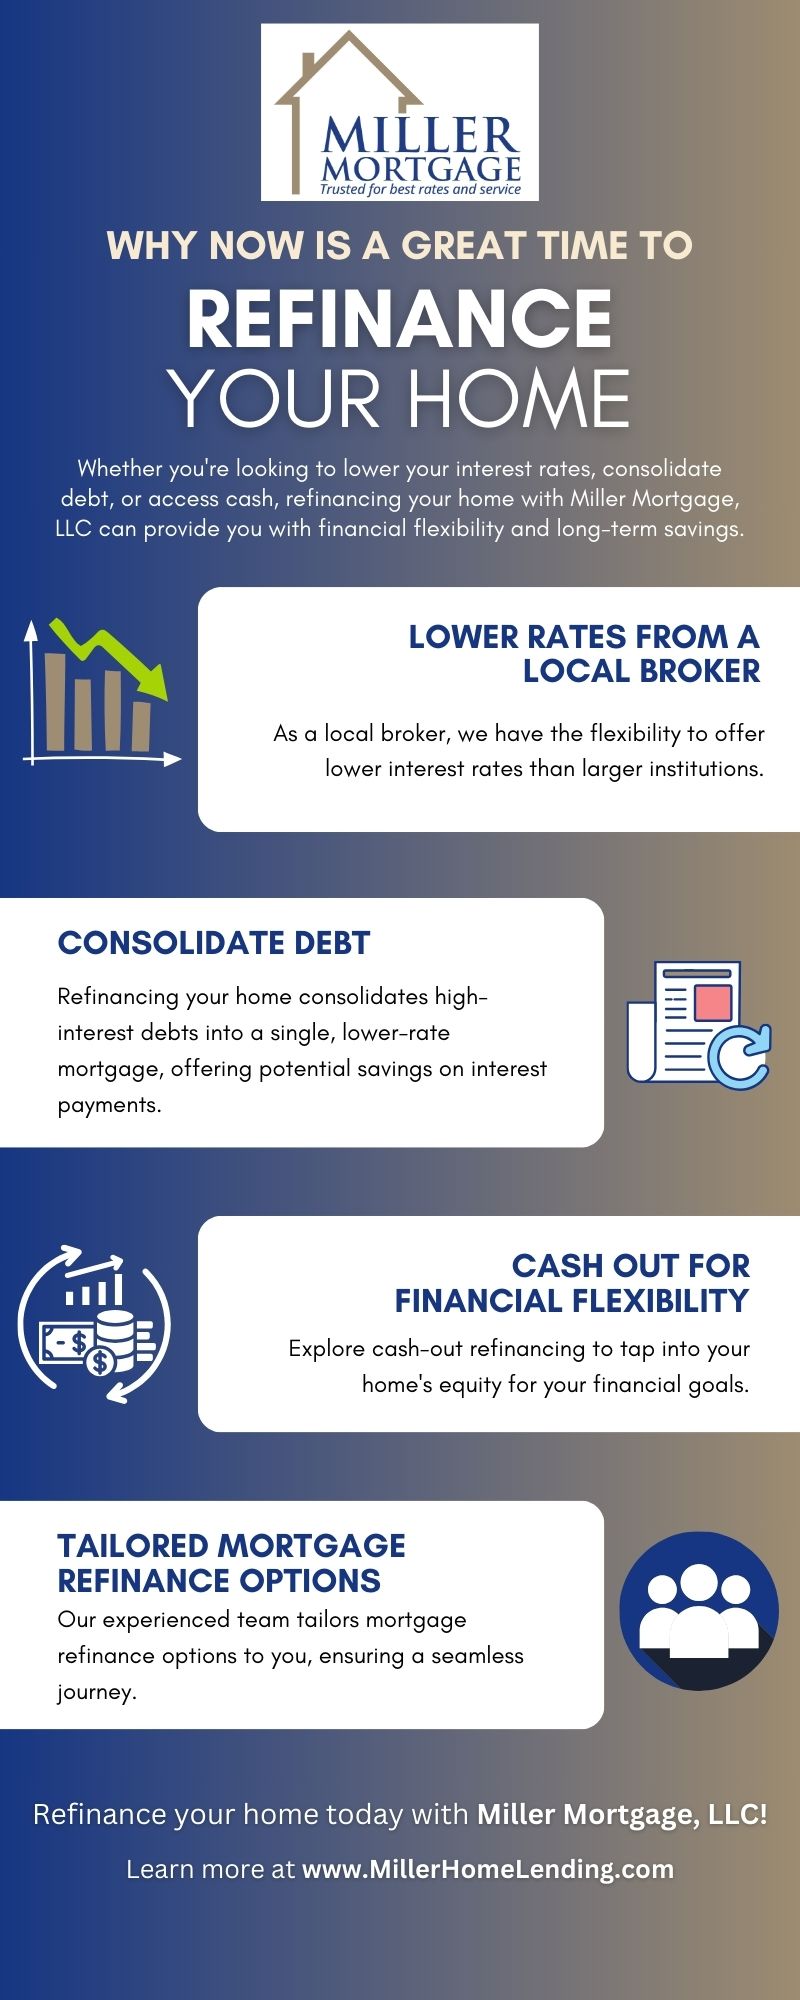 infographic explaining why now is a great time to refinance a home